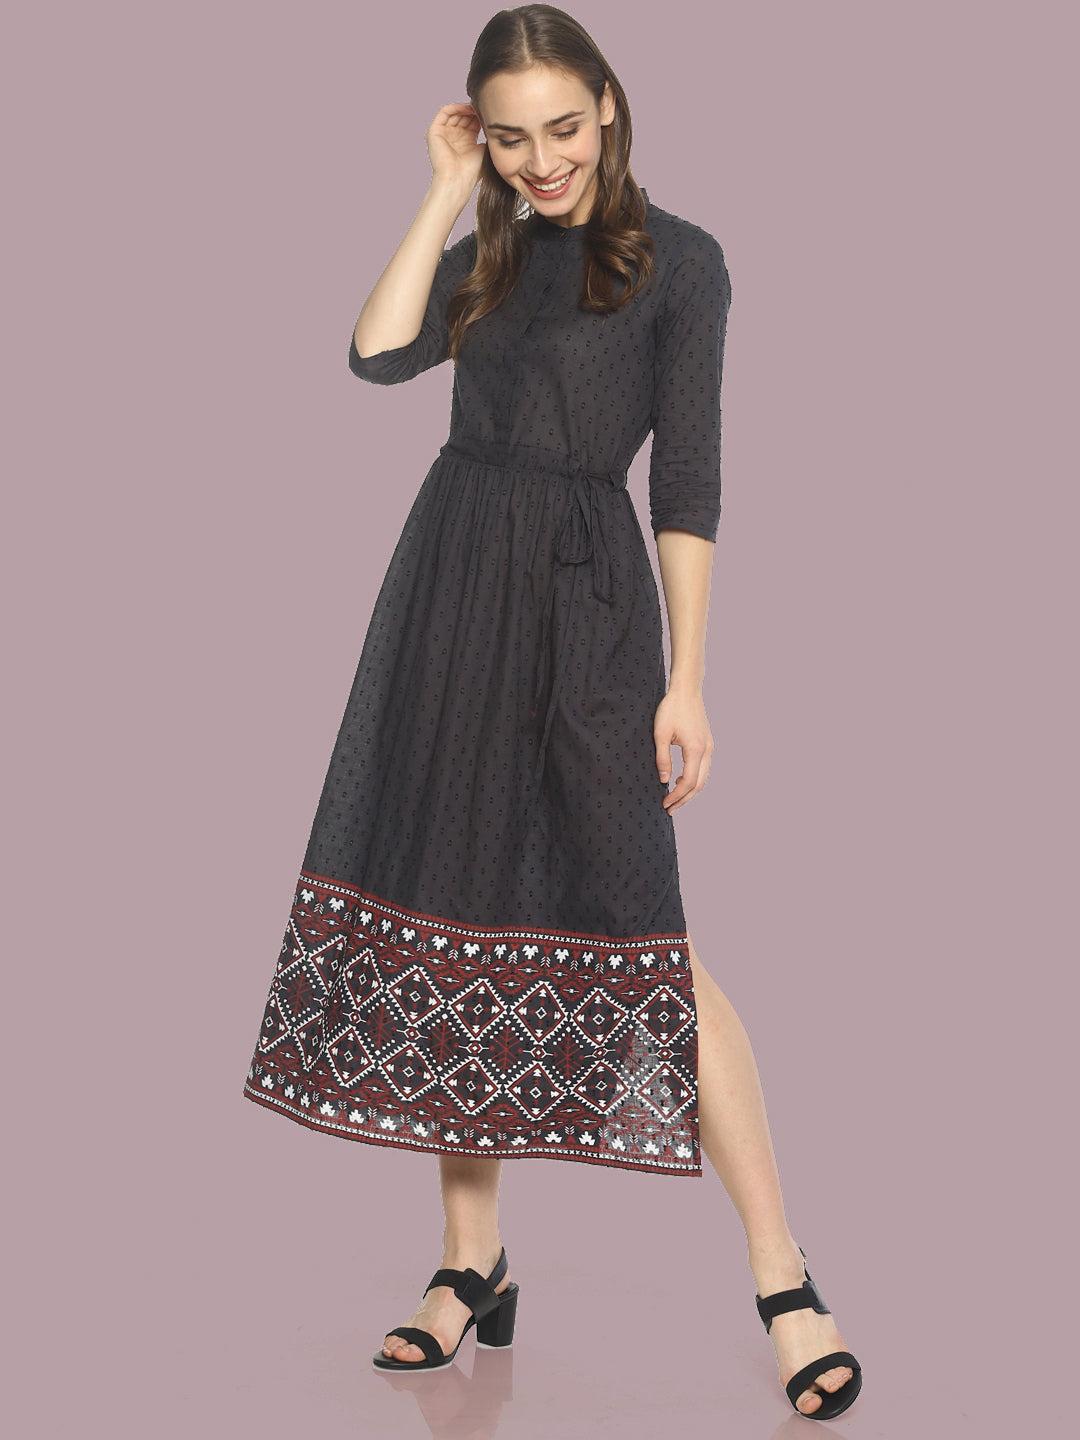 grey-front-open-dress-with-printed-hem